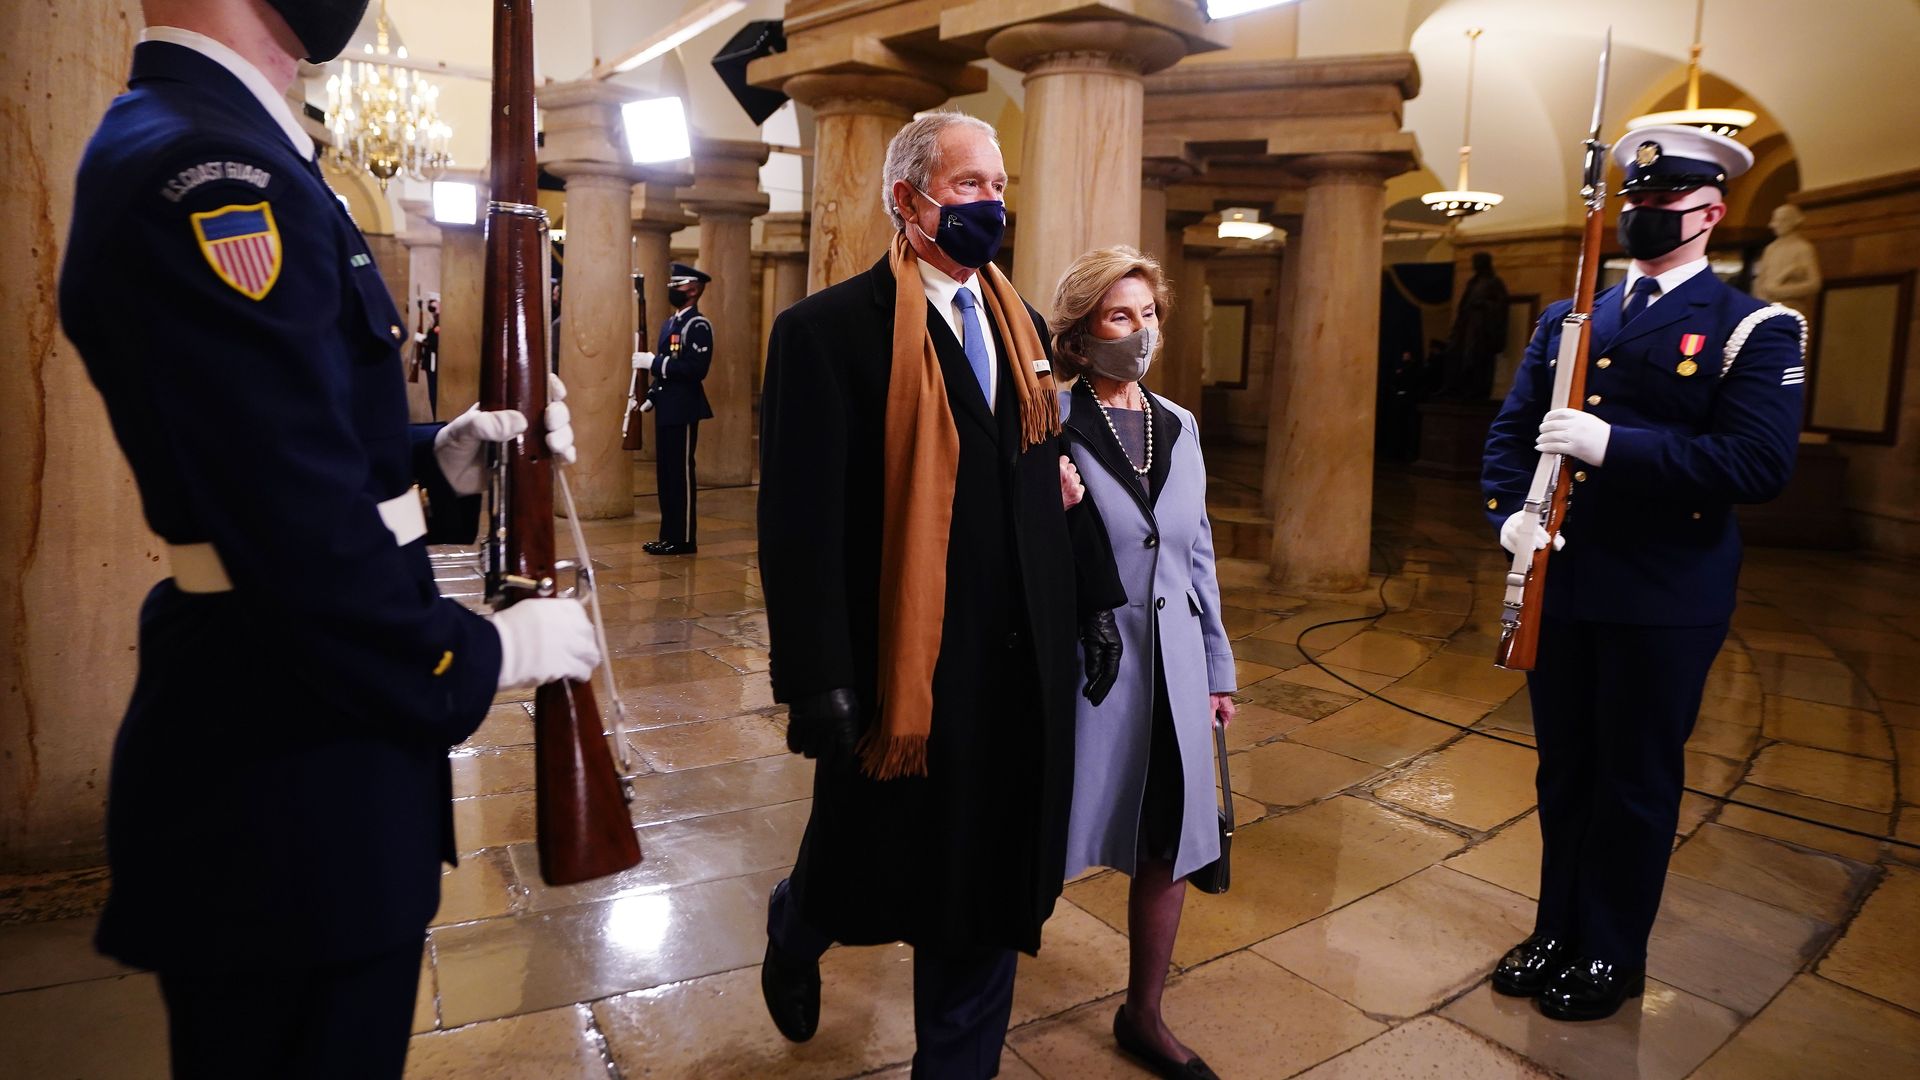 Photo of a masked George W. Bush and Laura Bush walking through the Capitol building